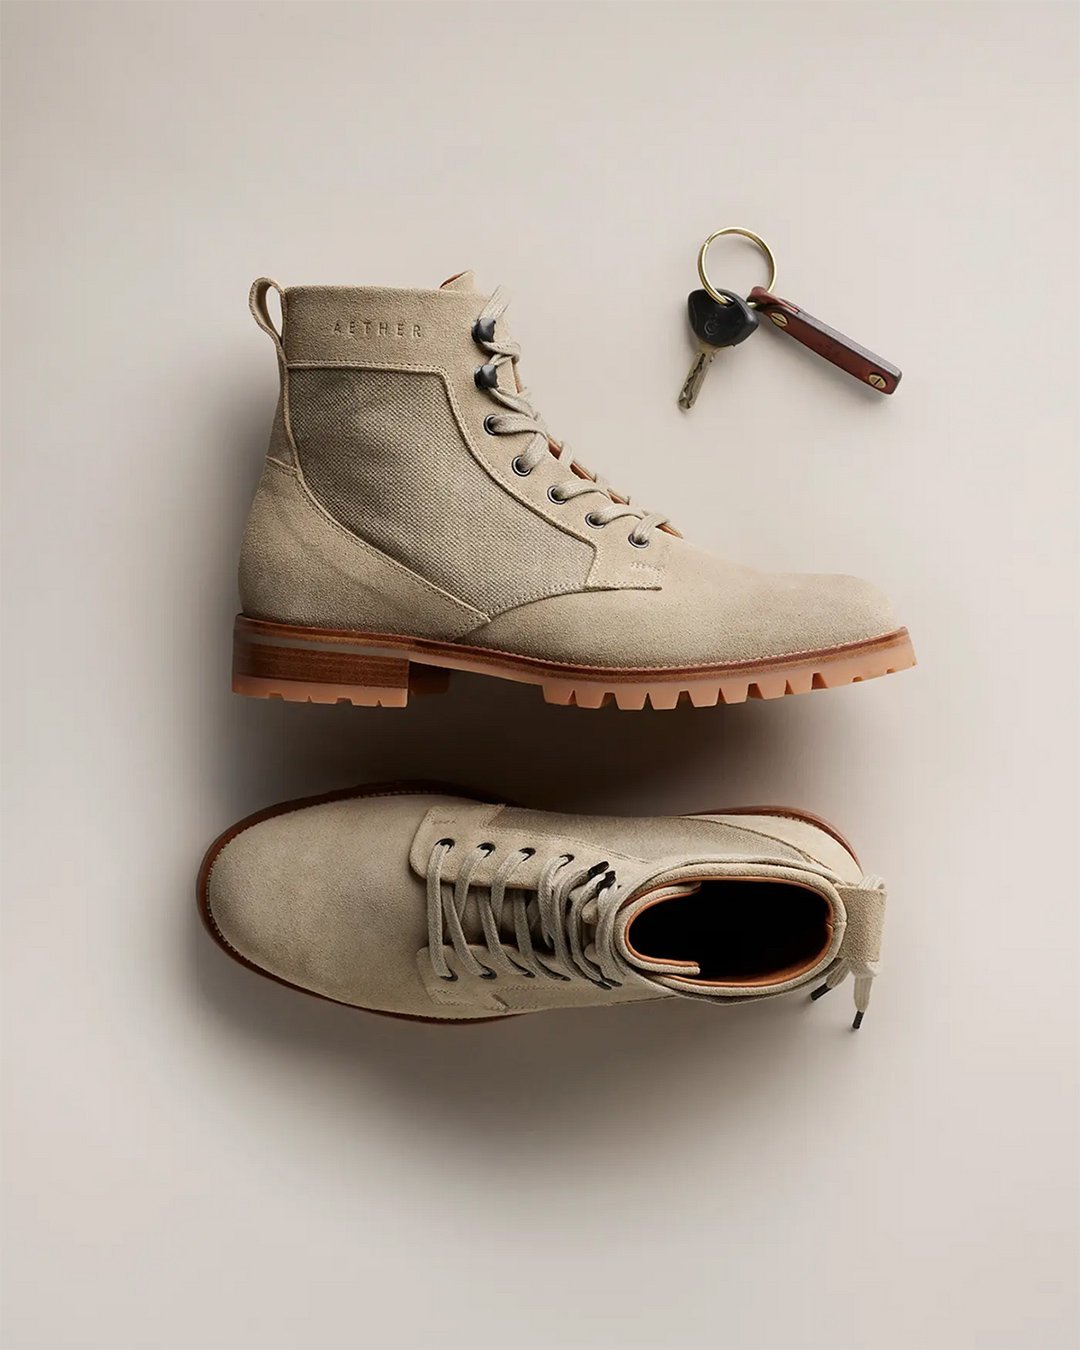 A pair of Aether Apparel Boots